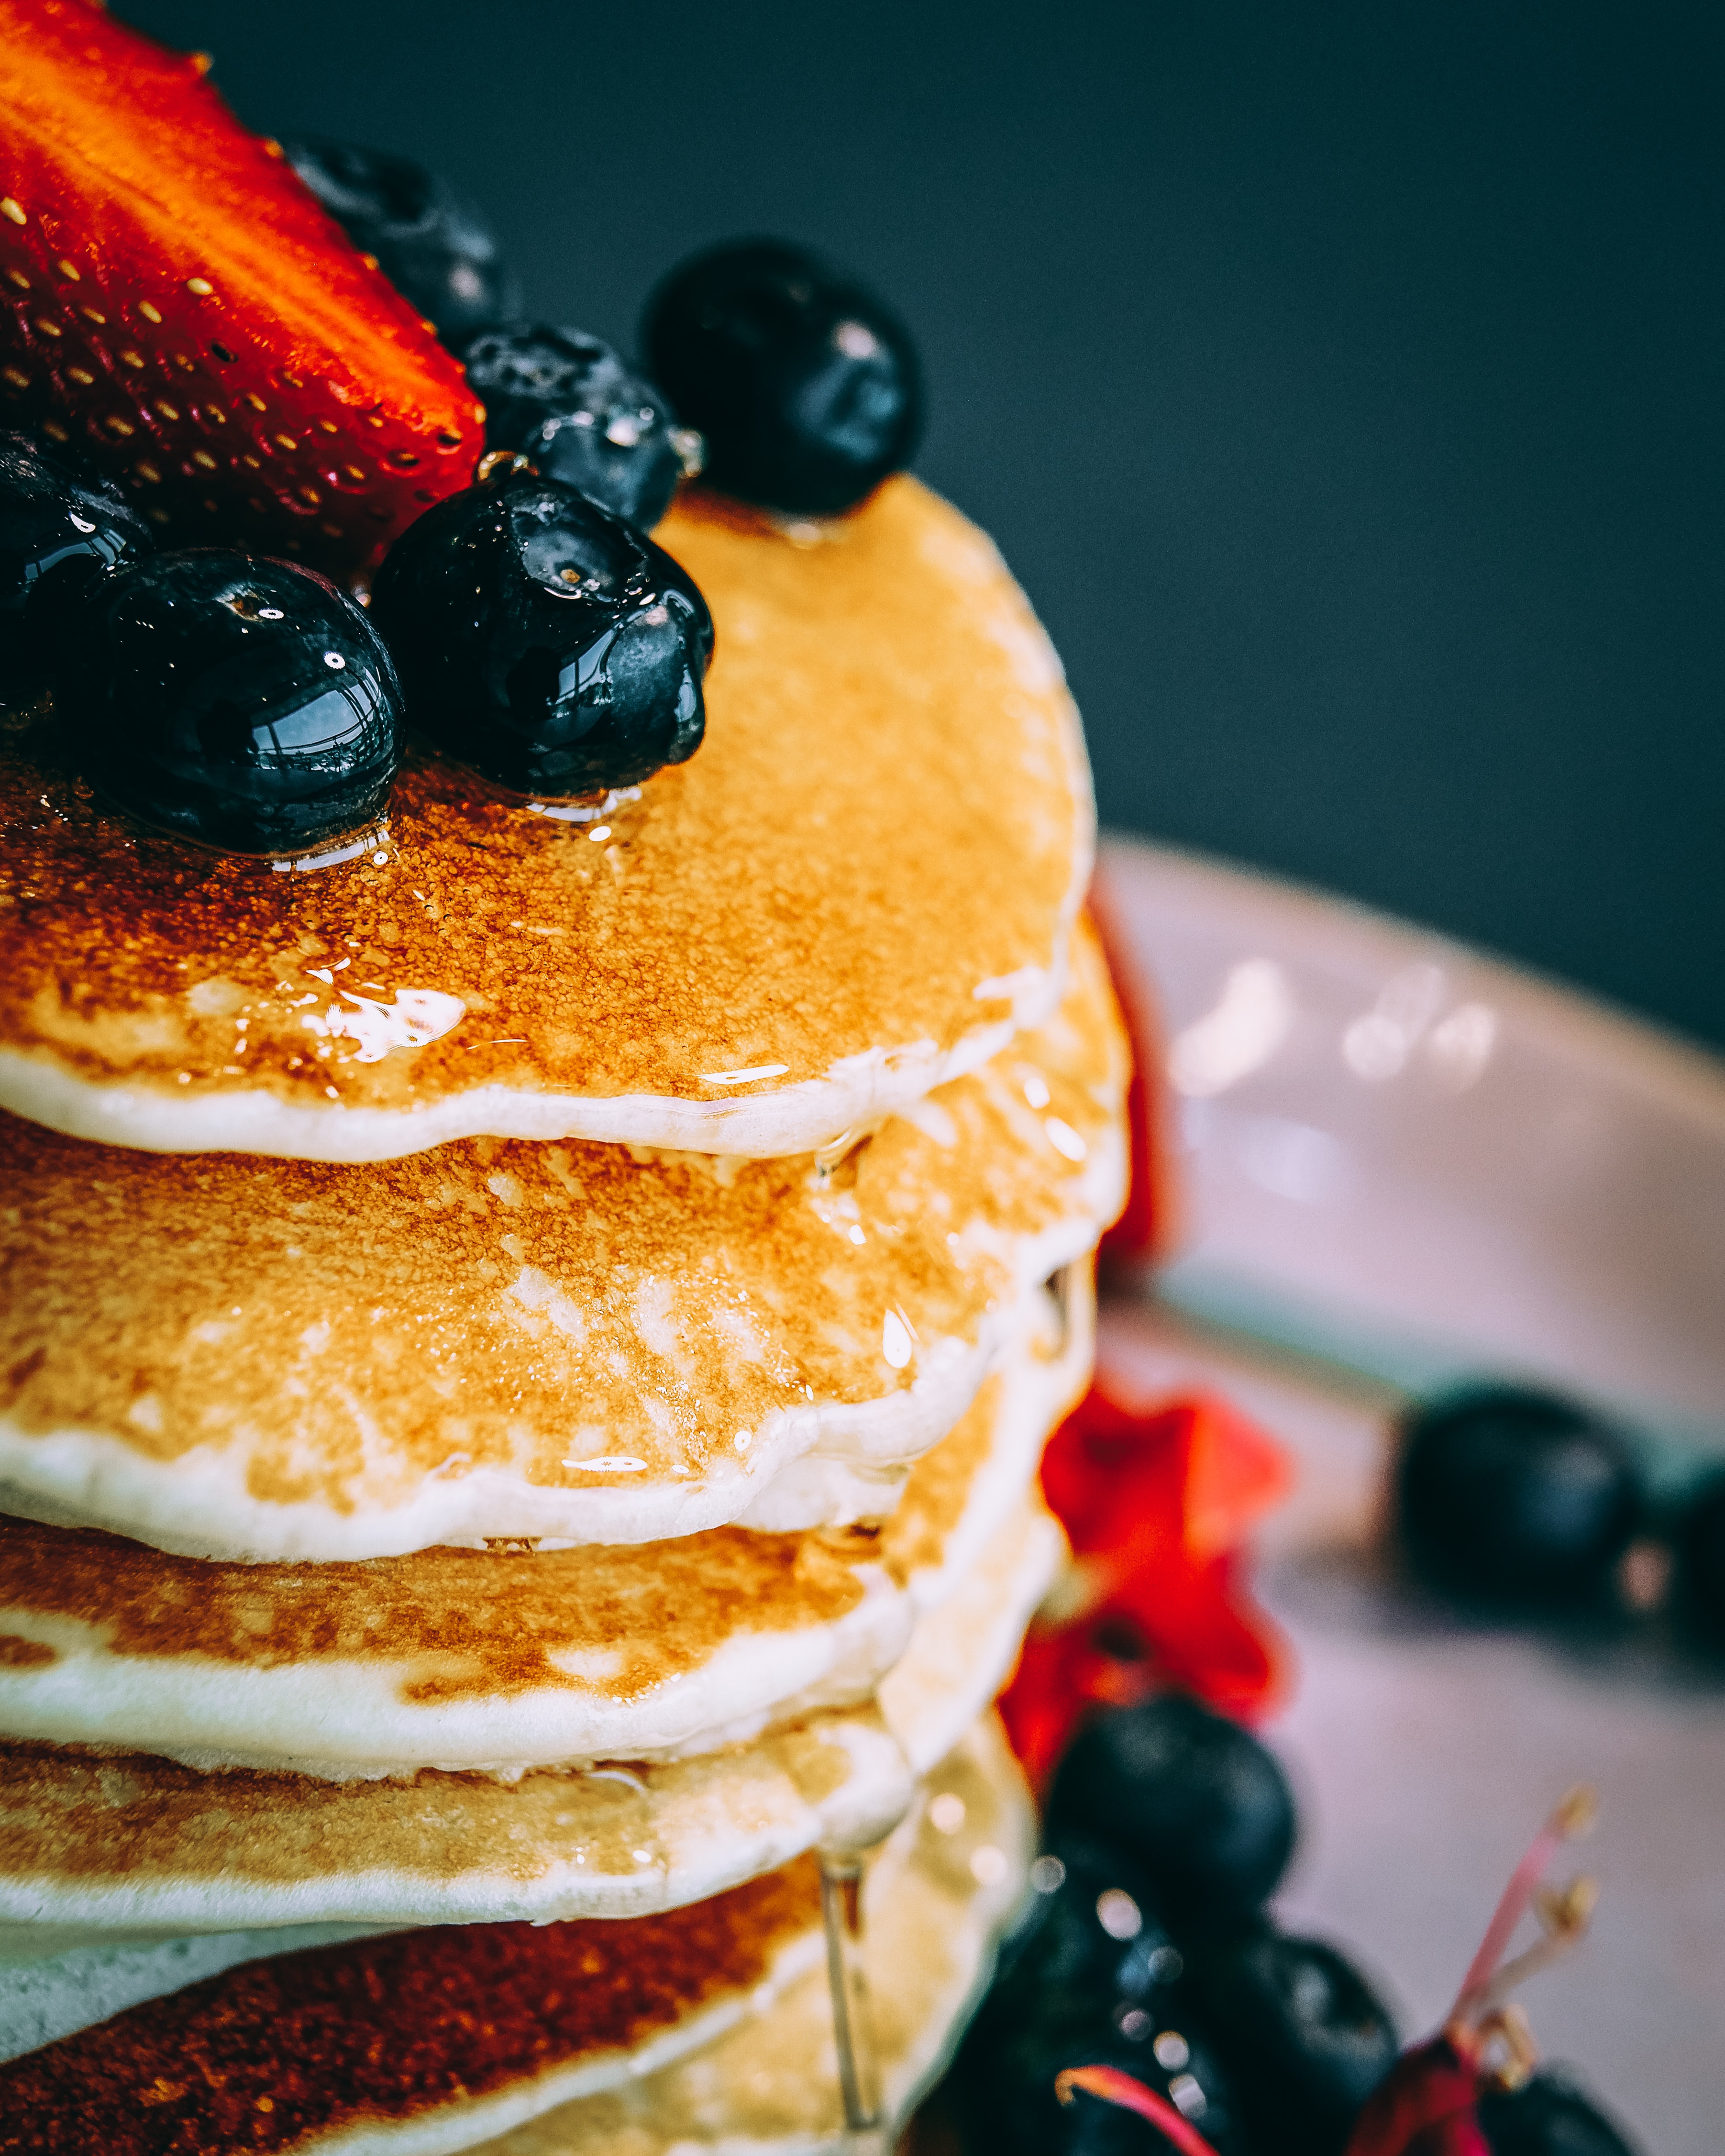 Stack of pancakes with fruit